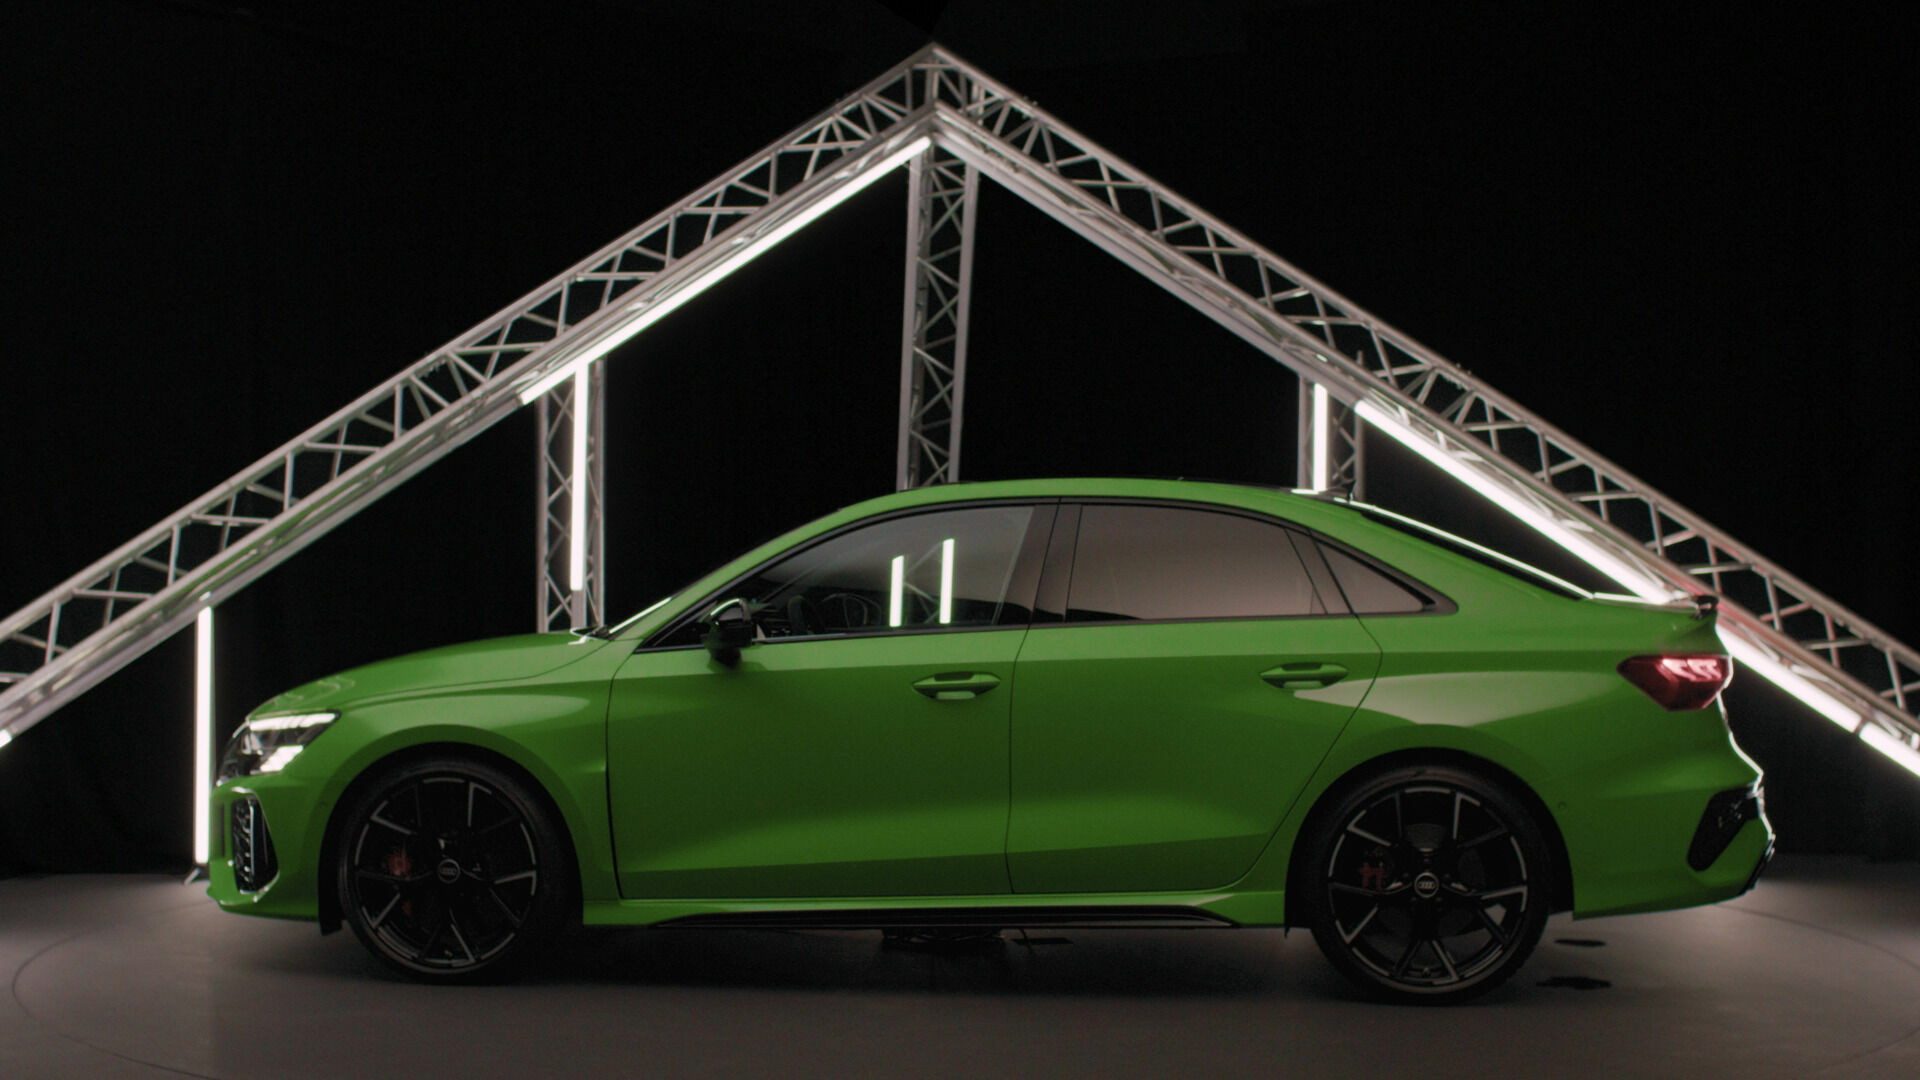 The design of the Audi RS 3